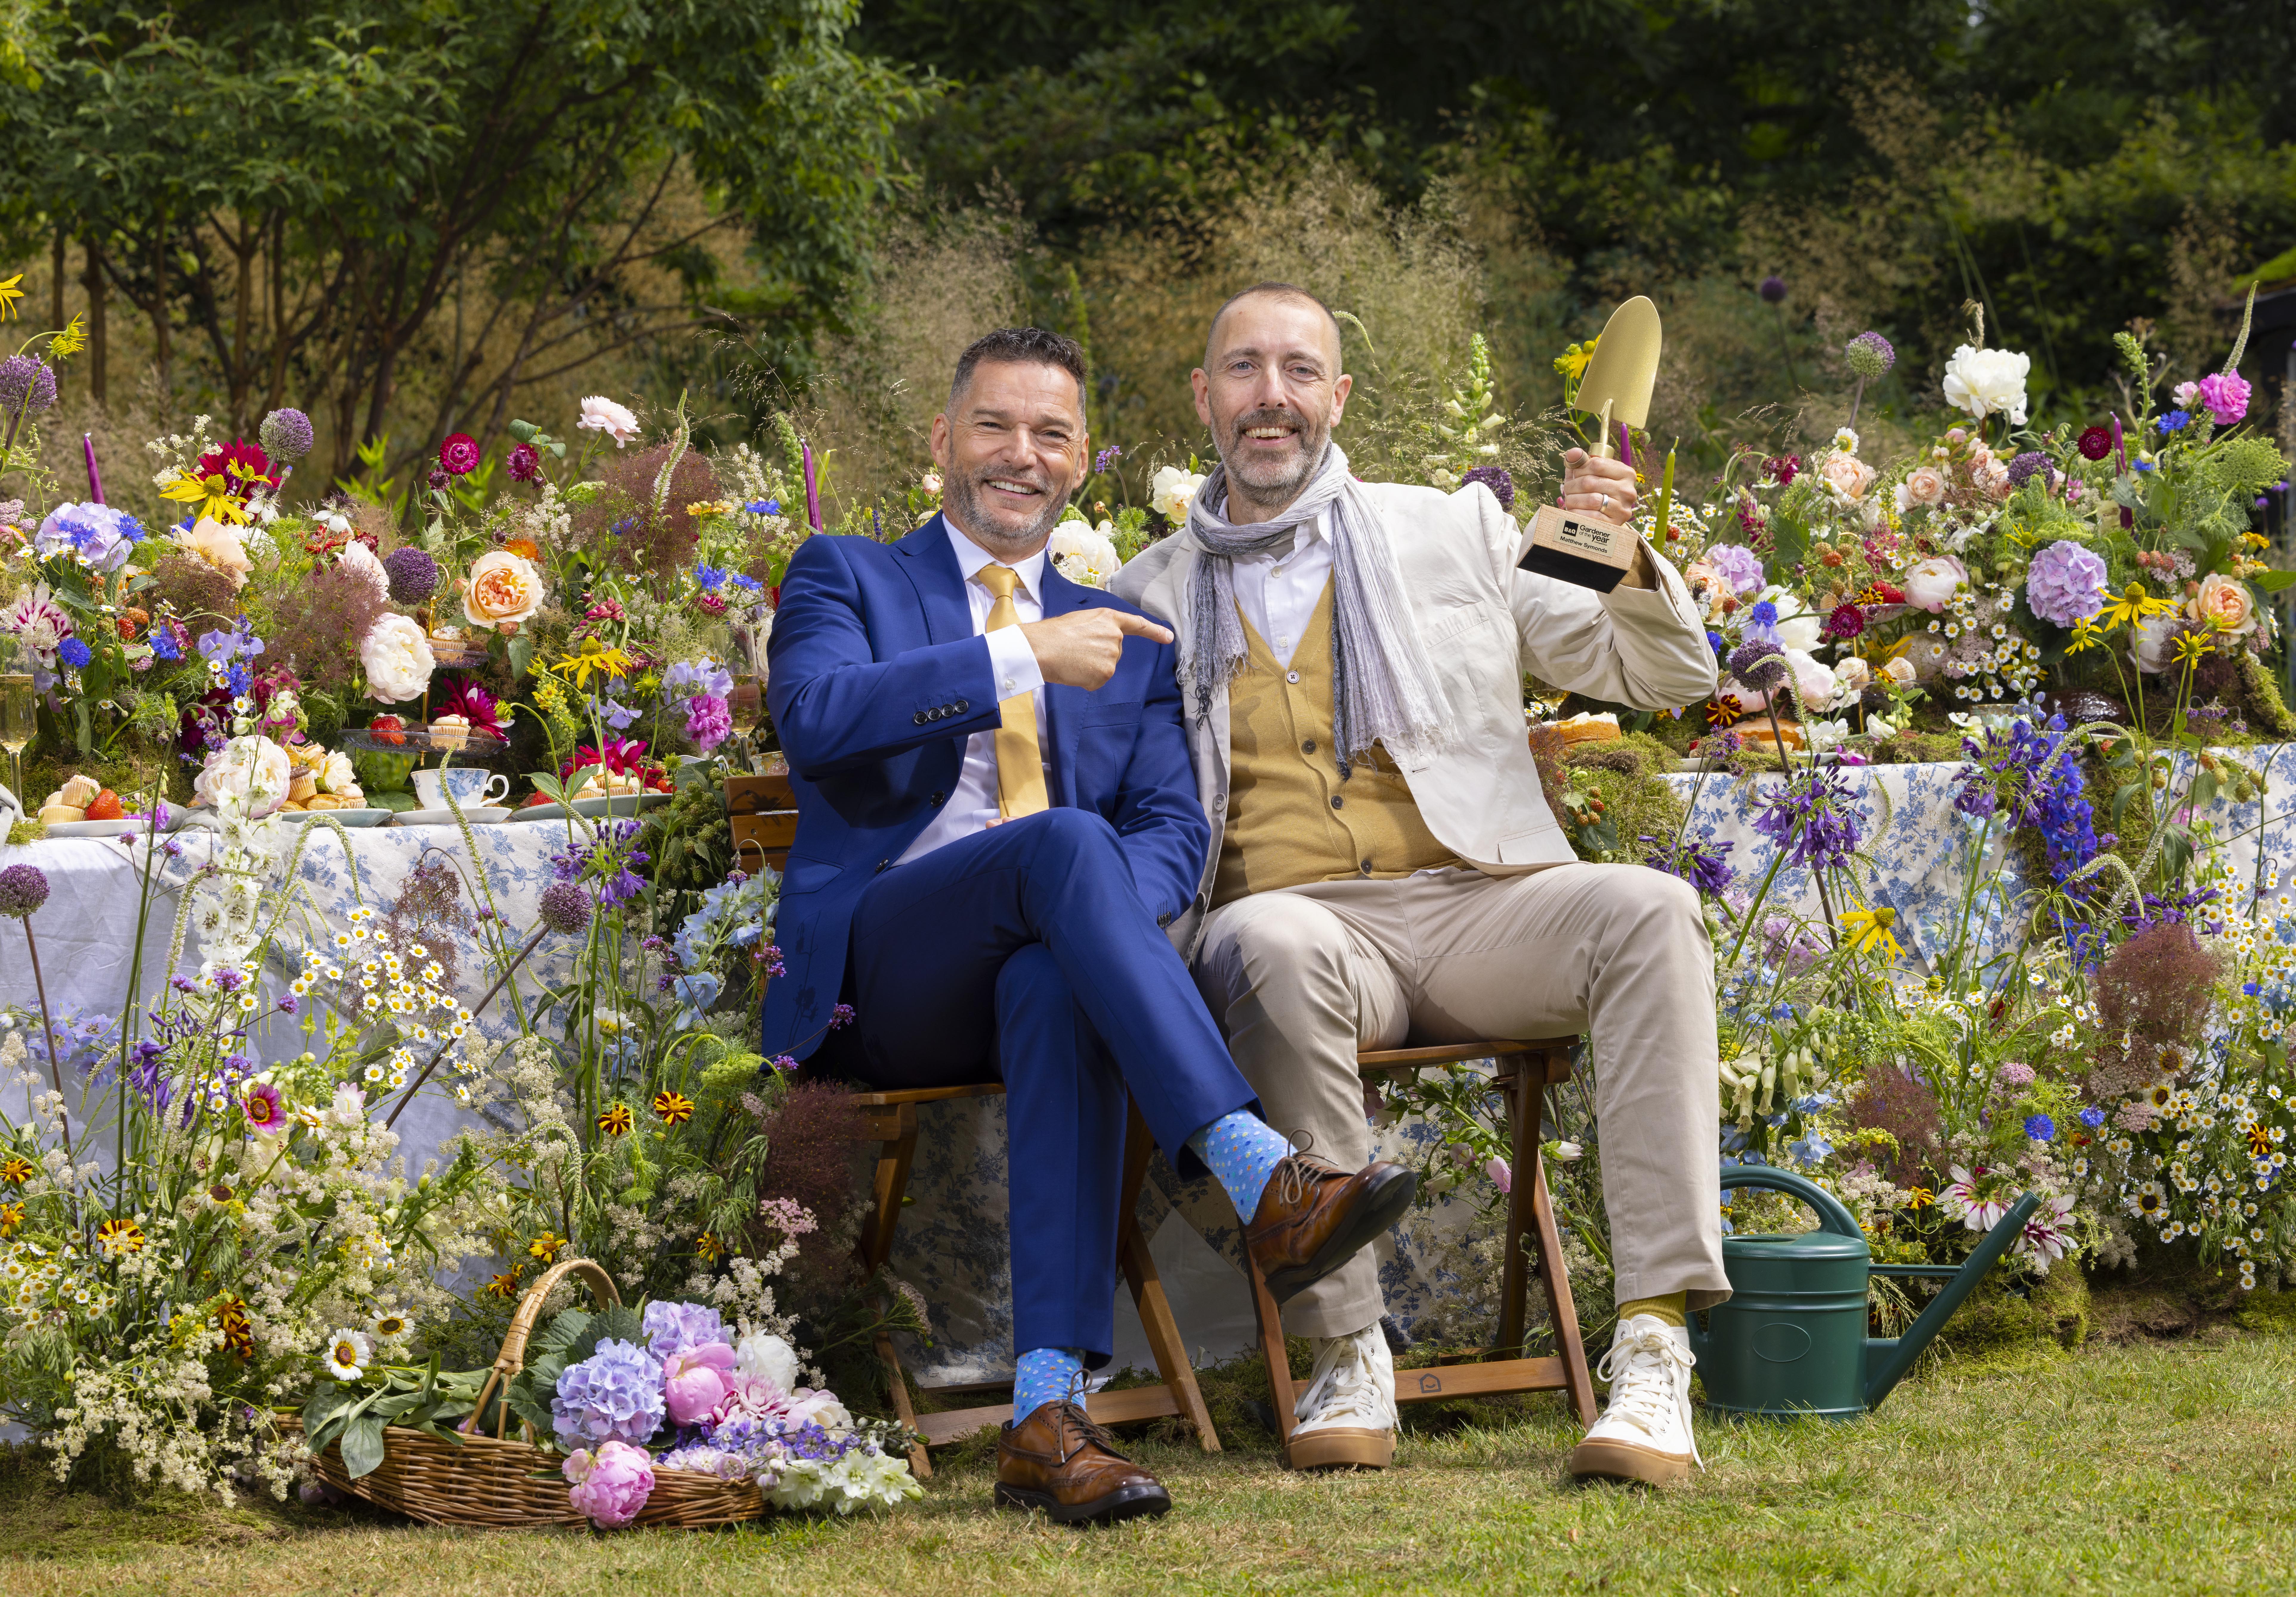 Matthew was named top gardener by judges including Fred Sirieix